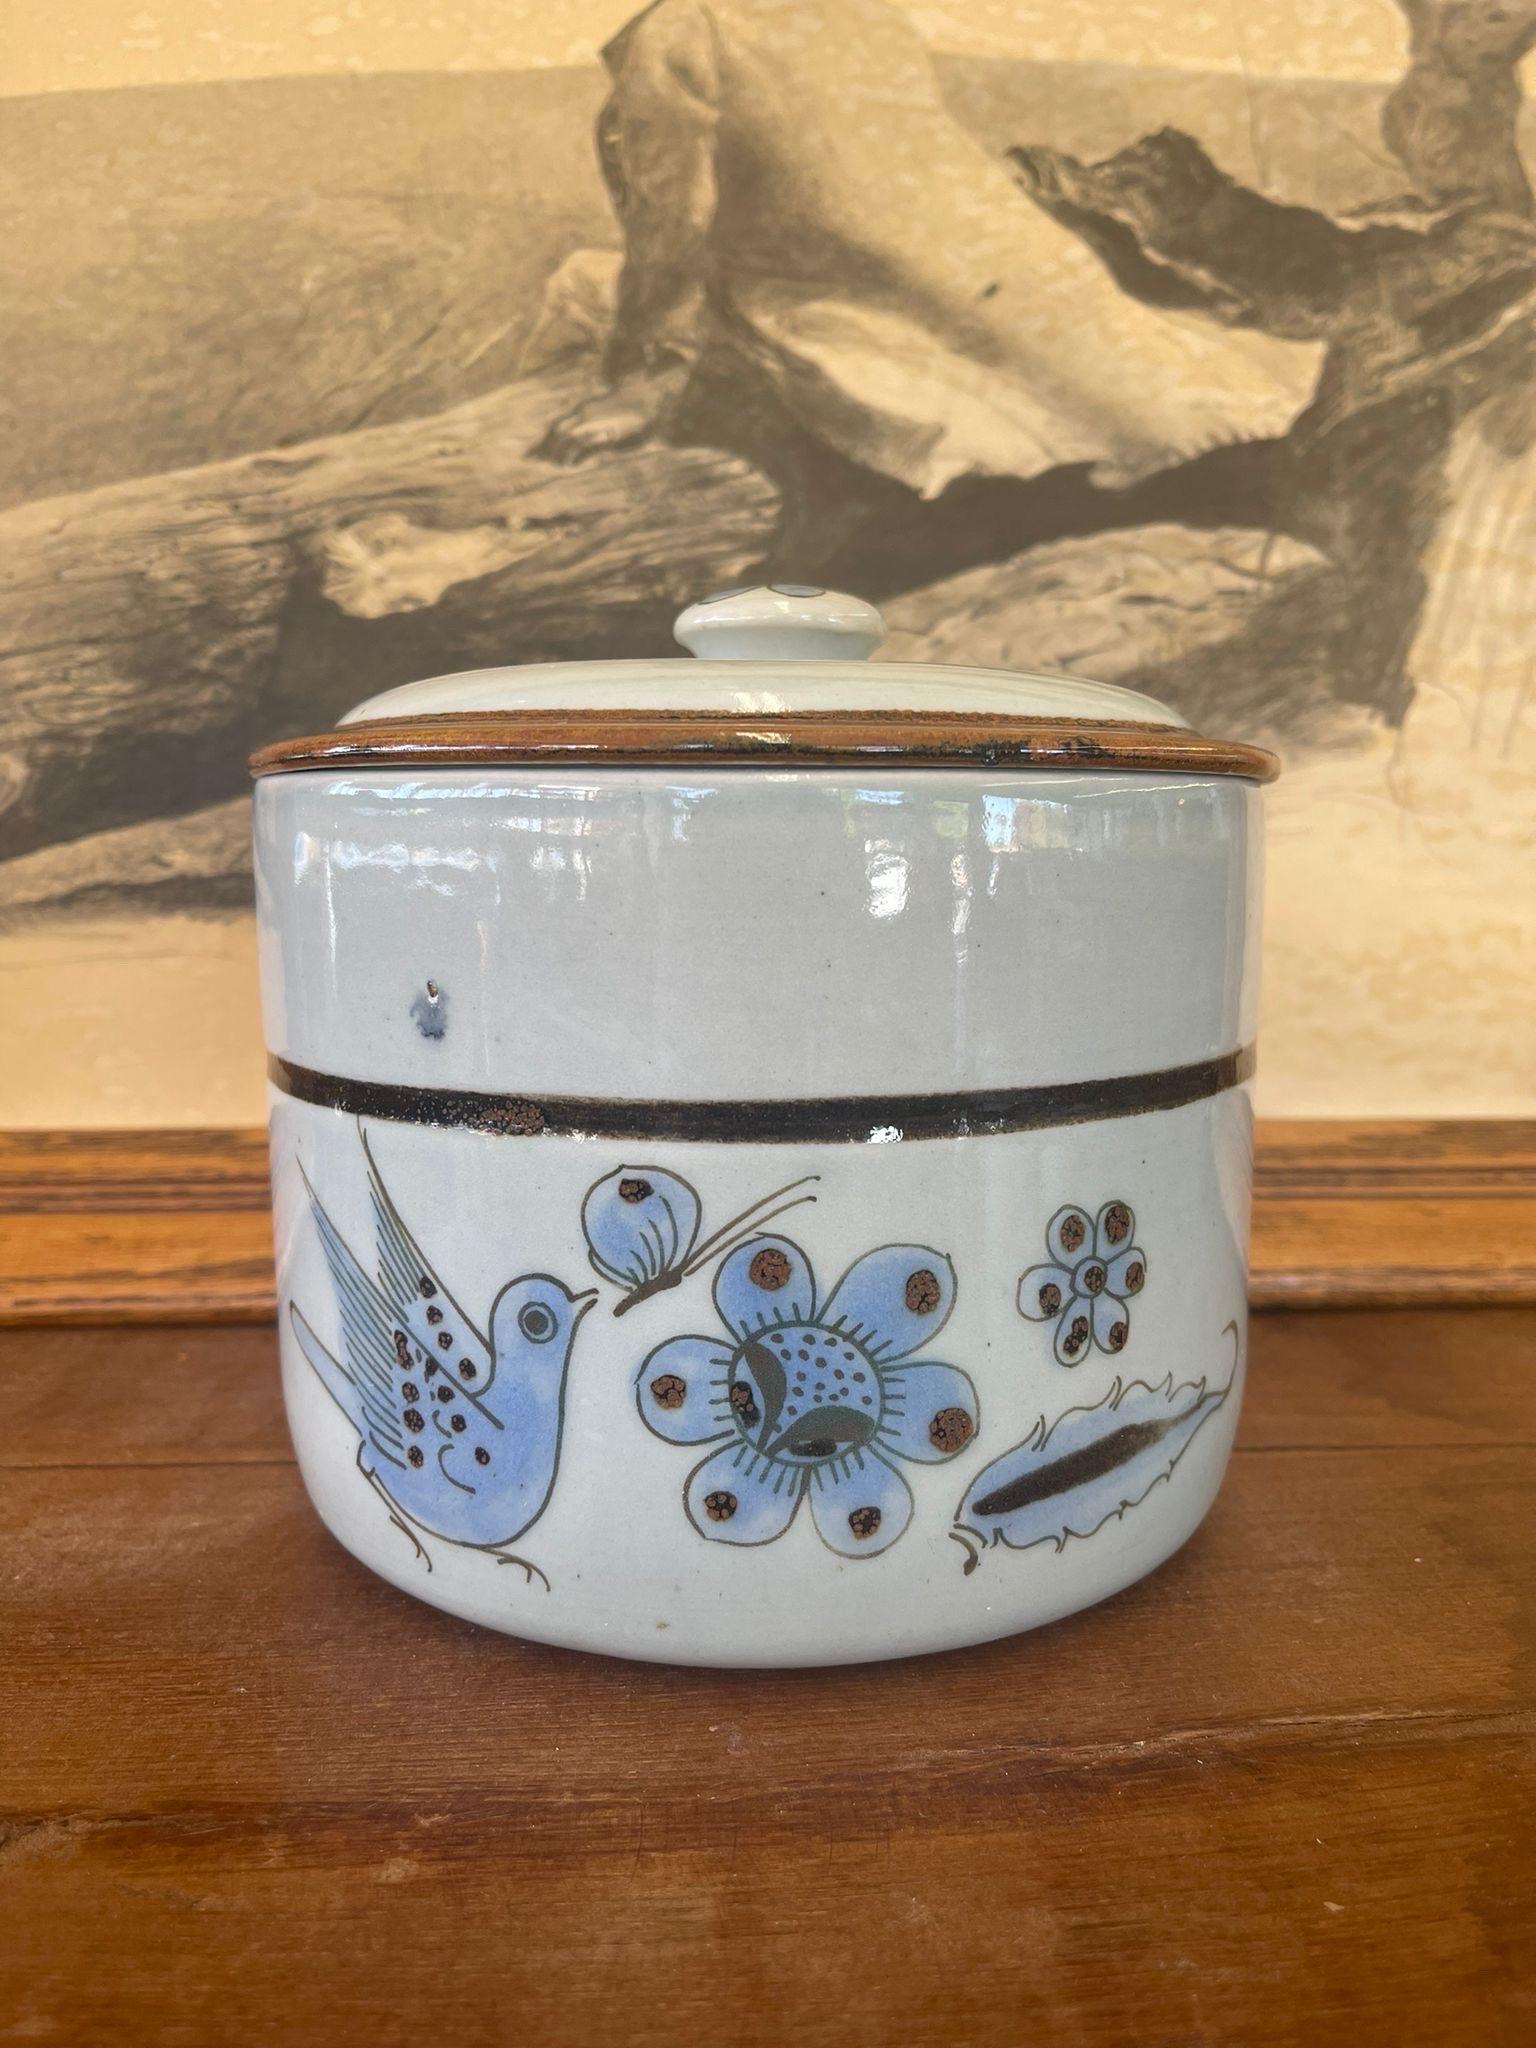 This Pot Features a Blue Bird and Floral Motif.  Makers Mark on the Bottom States “ ElbPalomarr Buen Gustp Mexico” Vintage Condition Consistent with Age.

Dimensions. 7 1/2 Diameter; 51/2 H